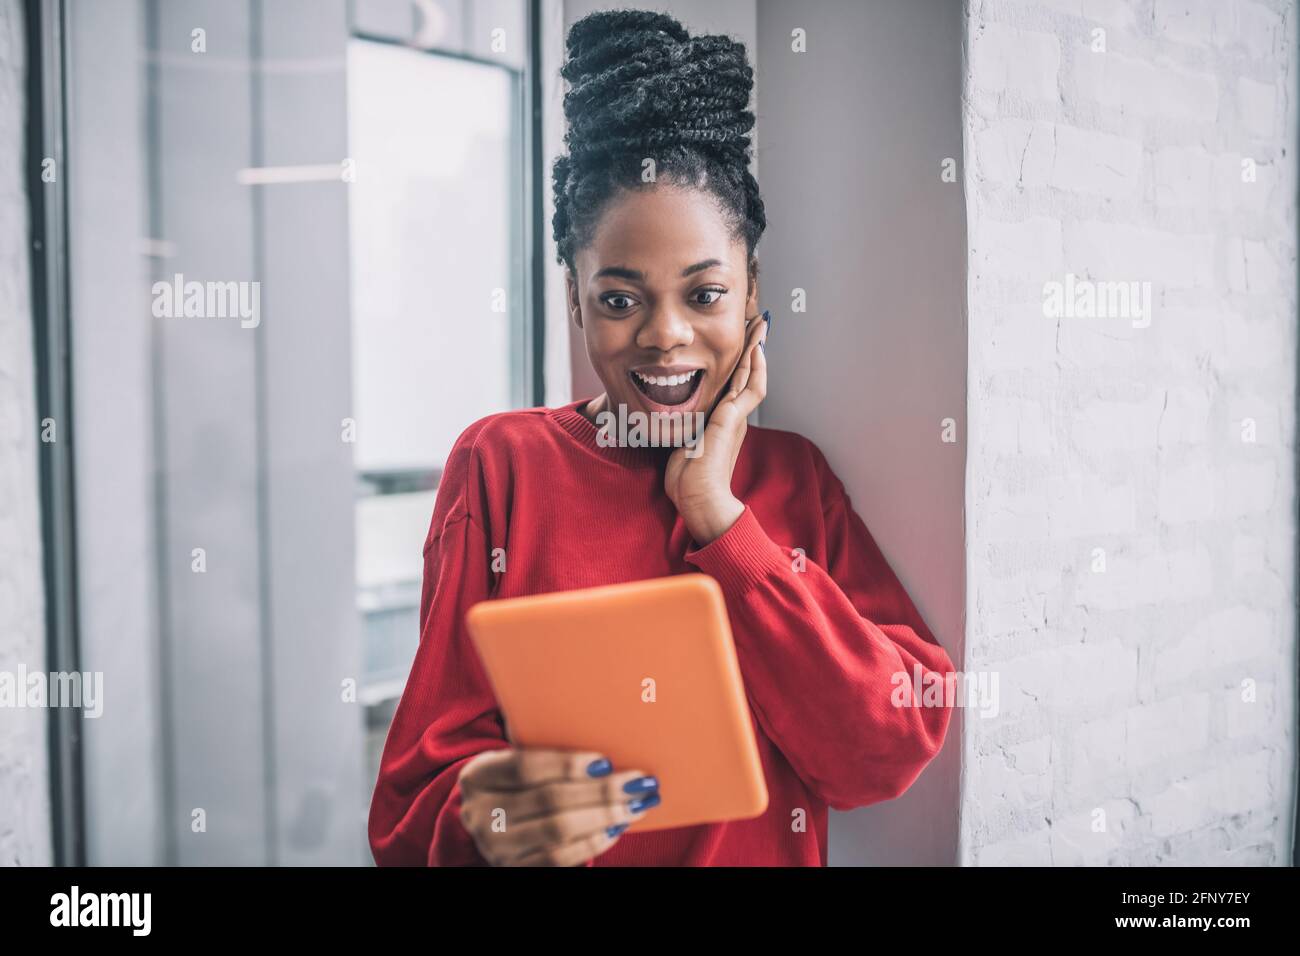 African american cute woman with a tablet looking excited Stock Photo